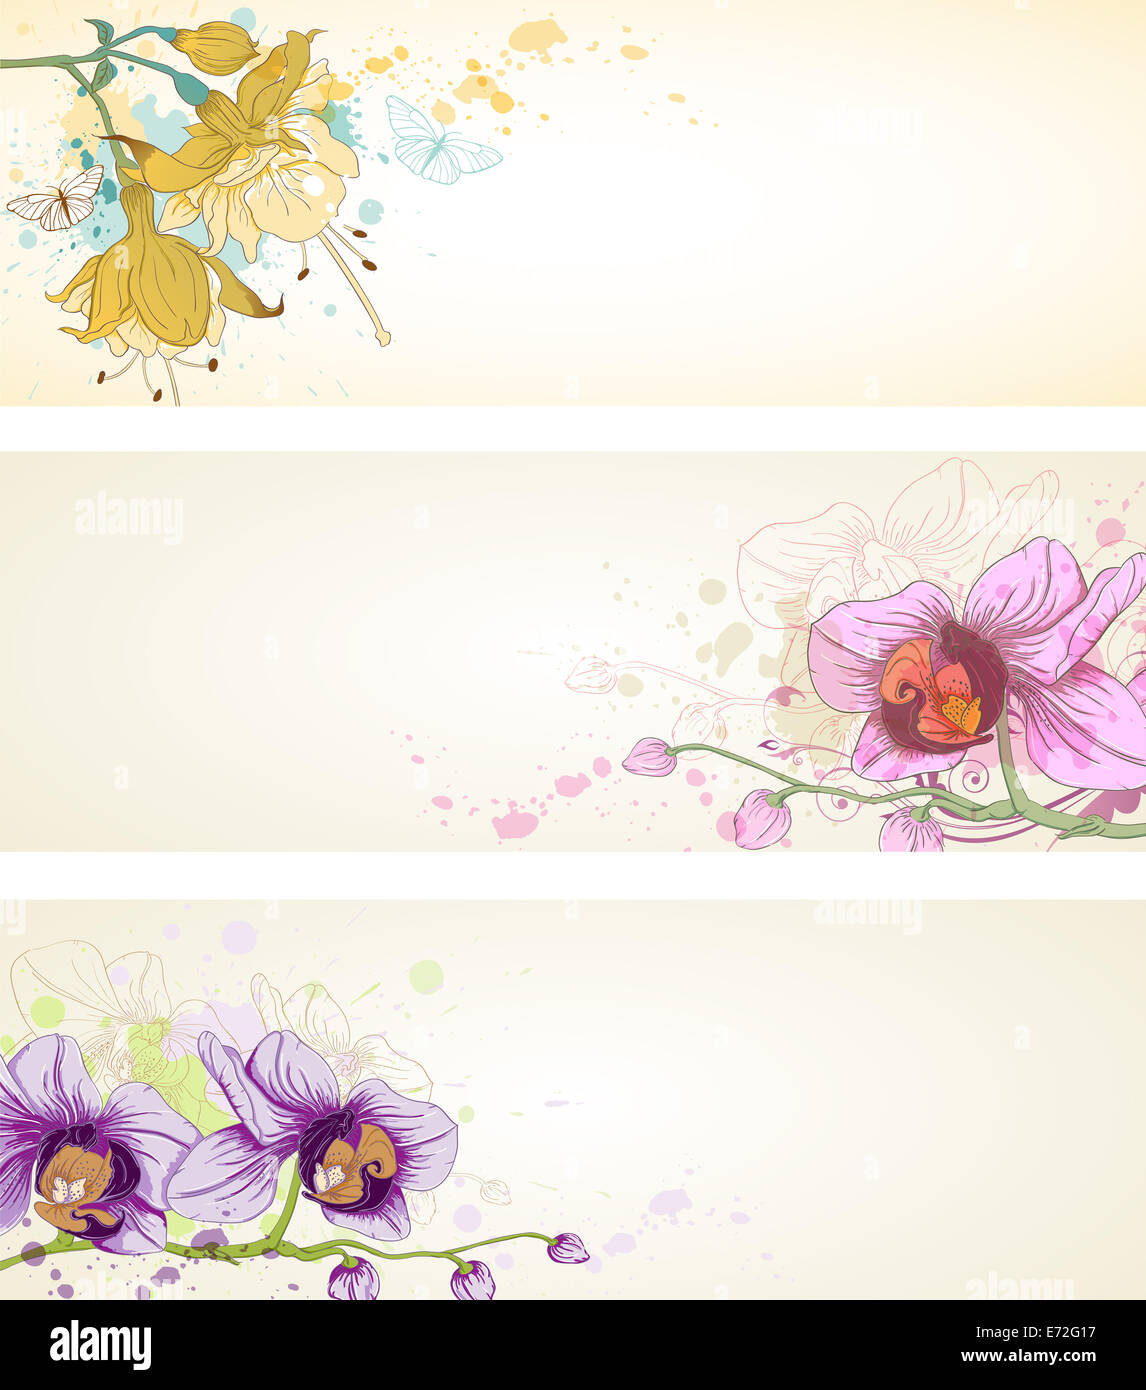 floral banners with butterflies and orchids Stock Photo